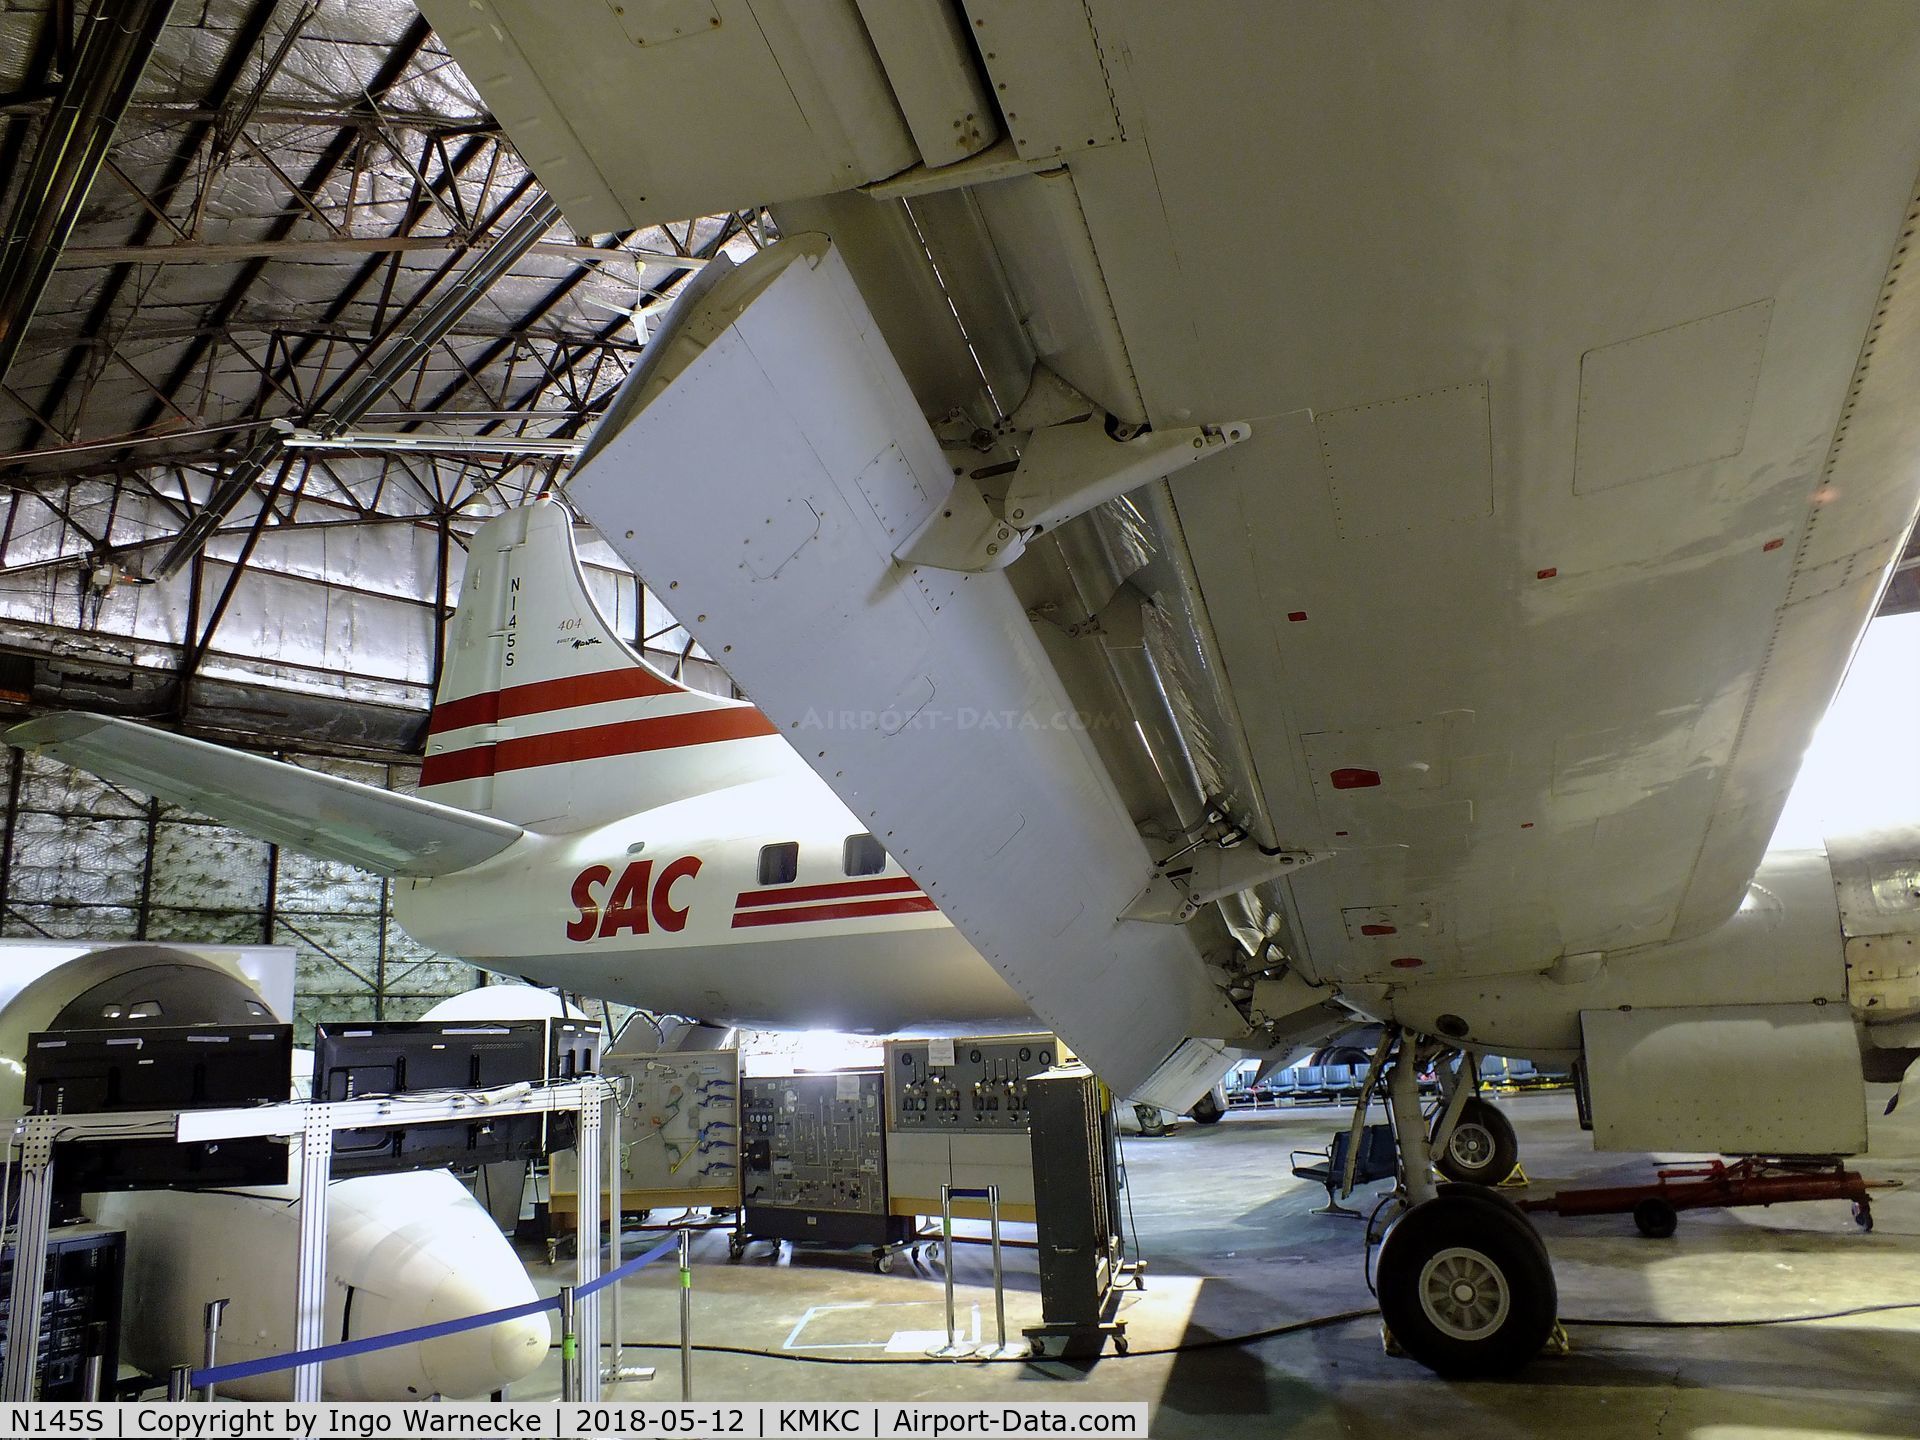 N145S, 1952 Martin 404 C/N 14142, Martin 404 at the Airline History Museum, Kansas City MO